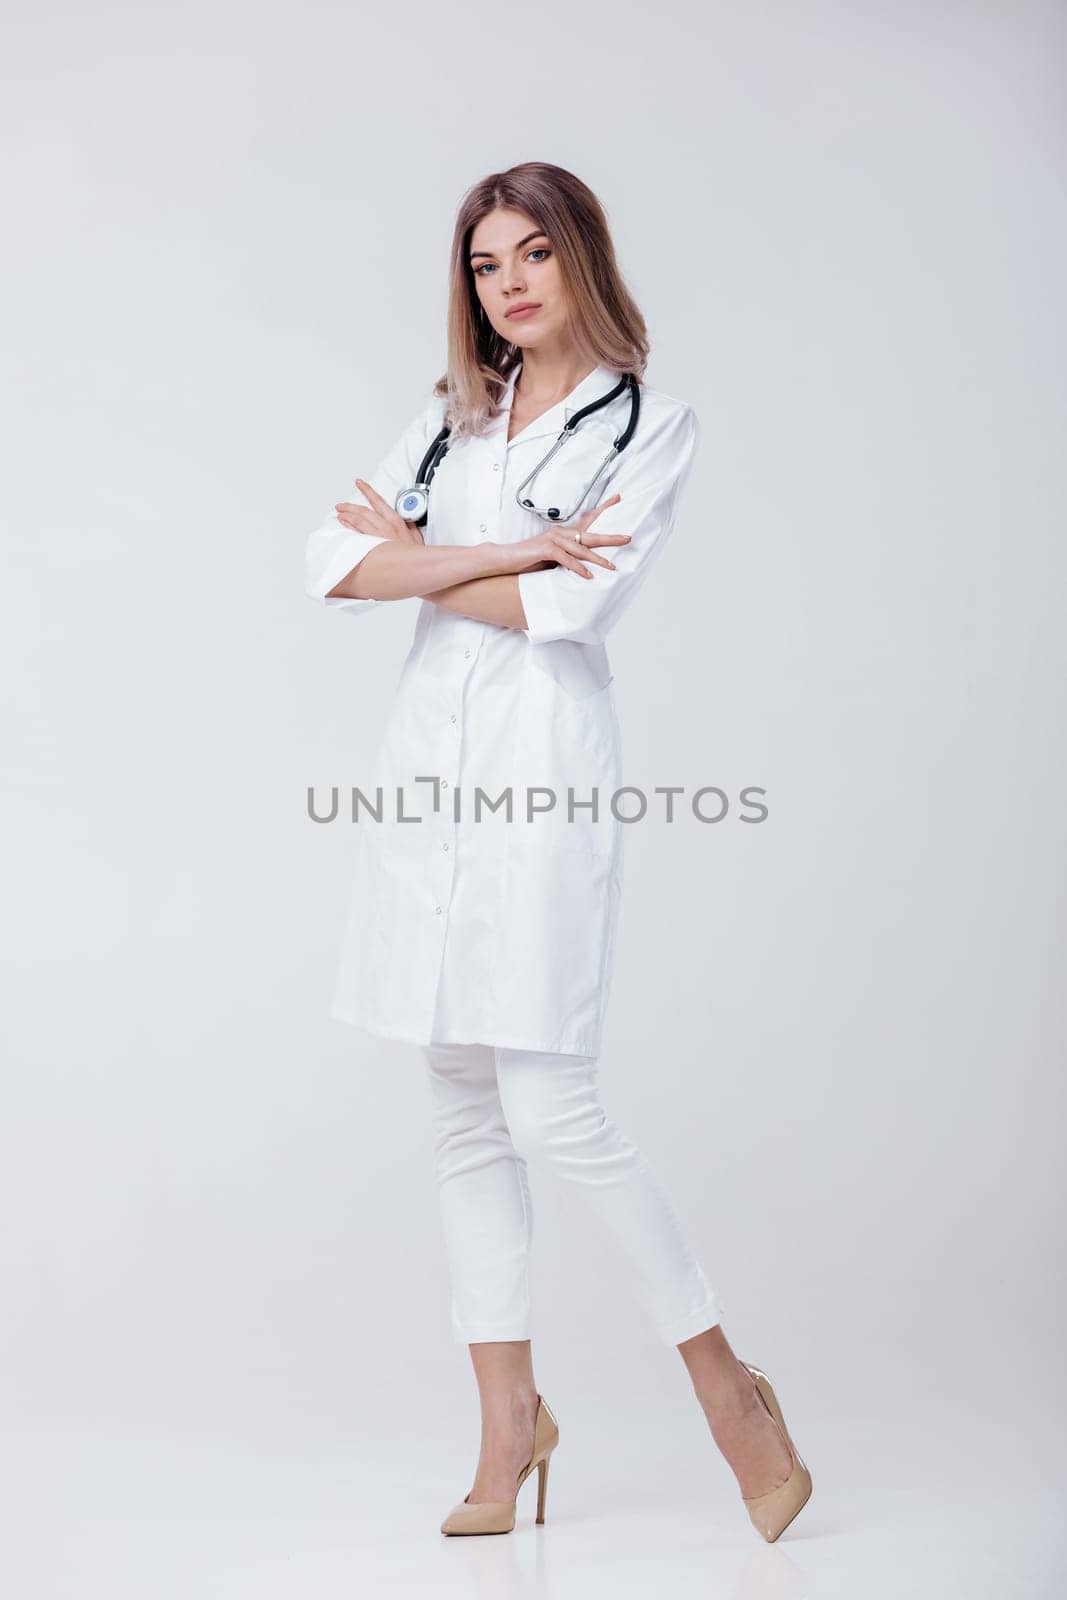 Medical physician doctor woman in white coat with stethoscope looks at camera on light background.